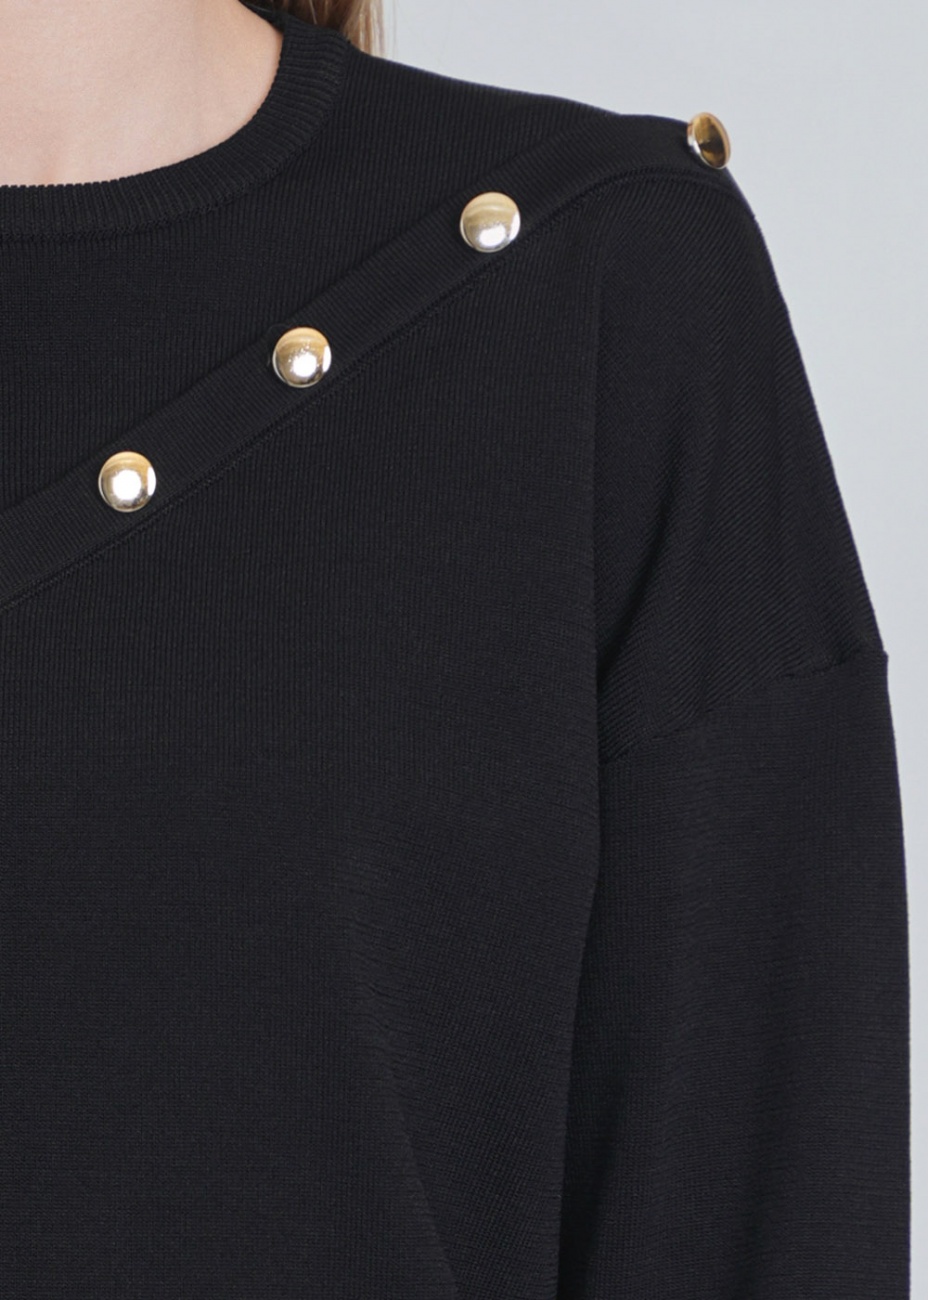 Chic Black Knit with Decorative Button Accents